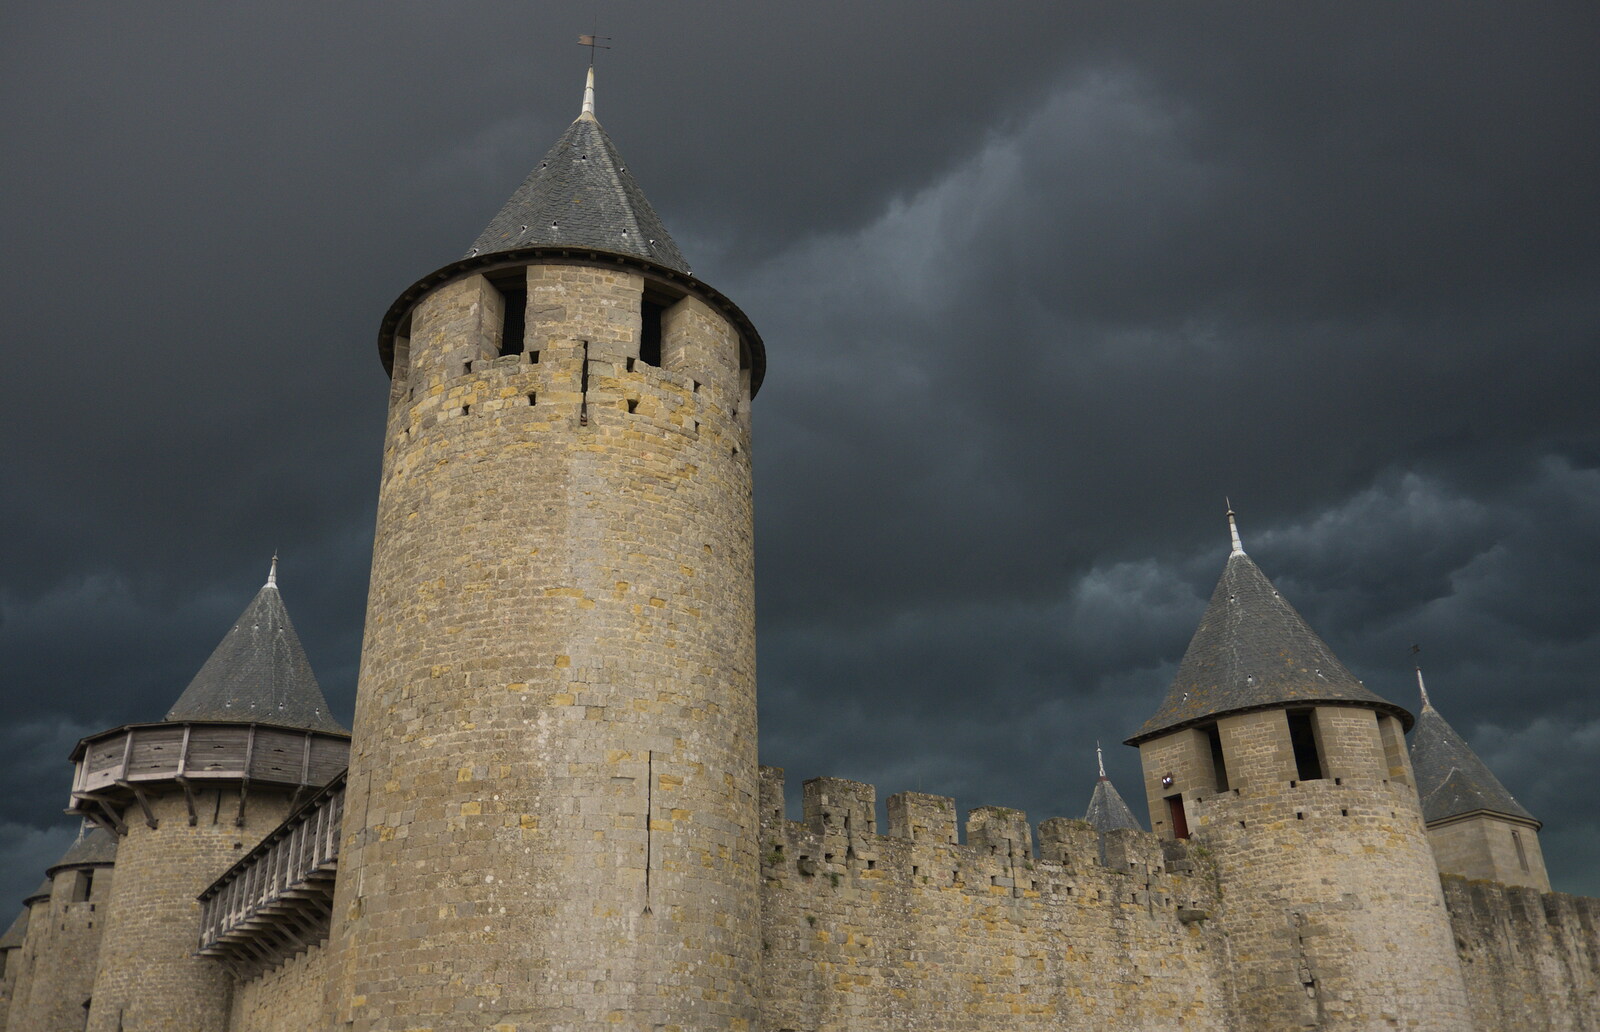 Darkness over the Chateau Comtal from A Trip to Carcassonne, Aude, France - 8th August 2018